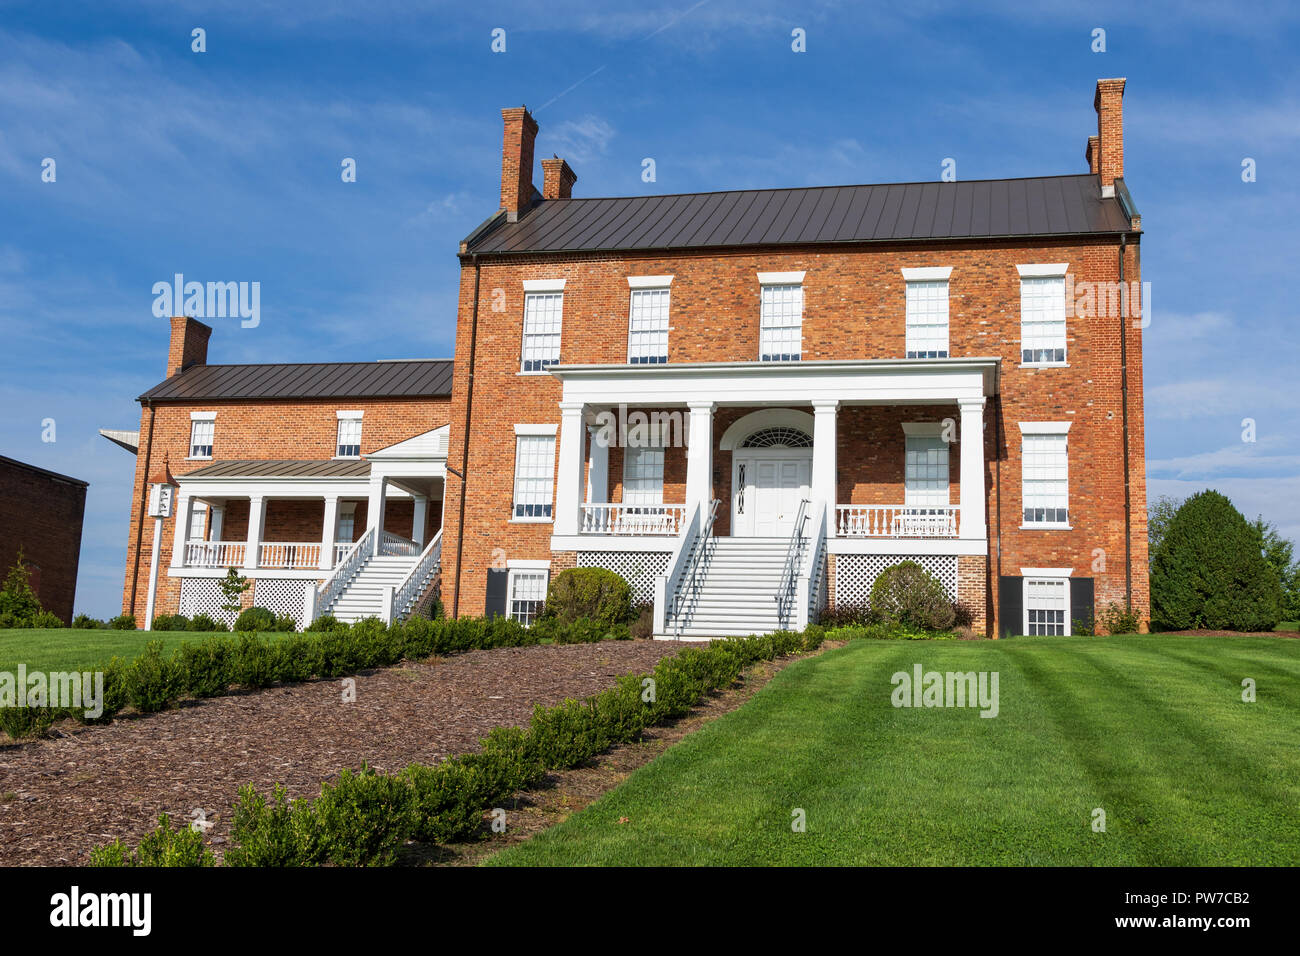 Greeneville, TN, USA-10-2-18: The Dickson-Williams Mansion  was built in Federal style in 1821. Stock Photo